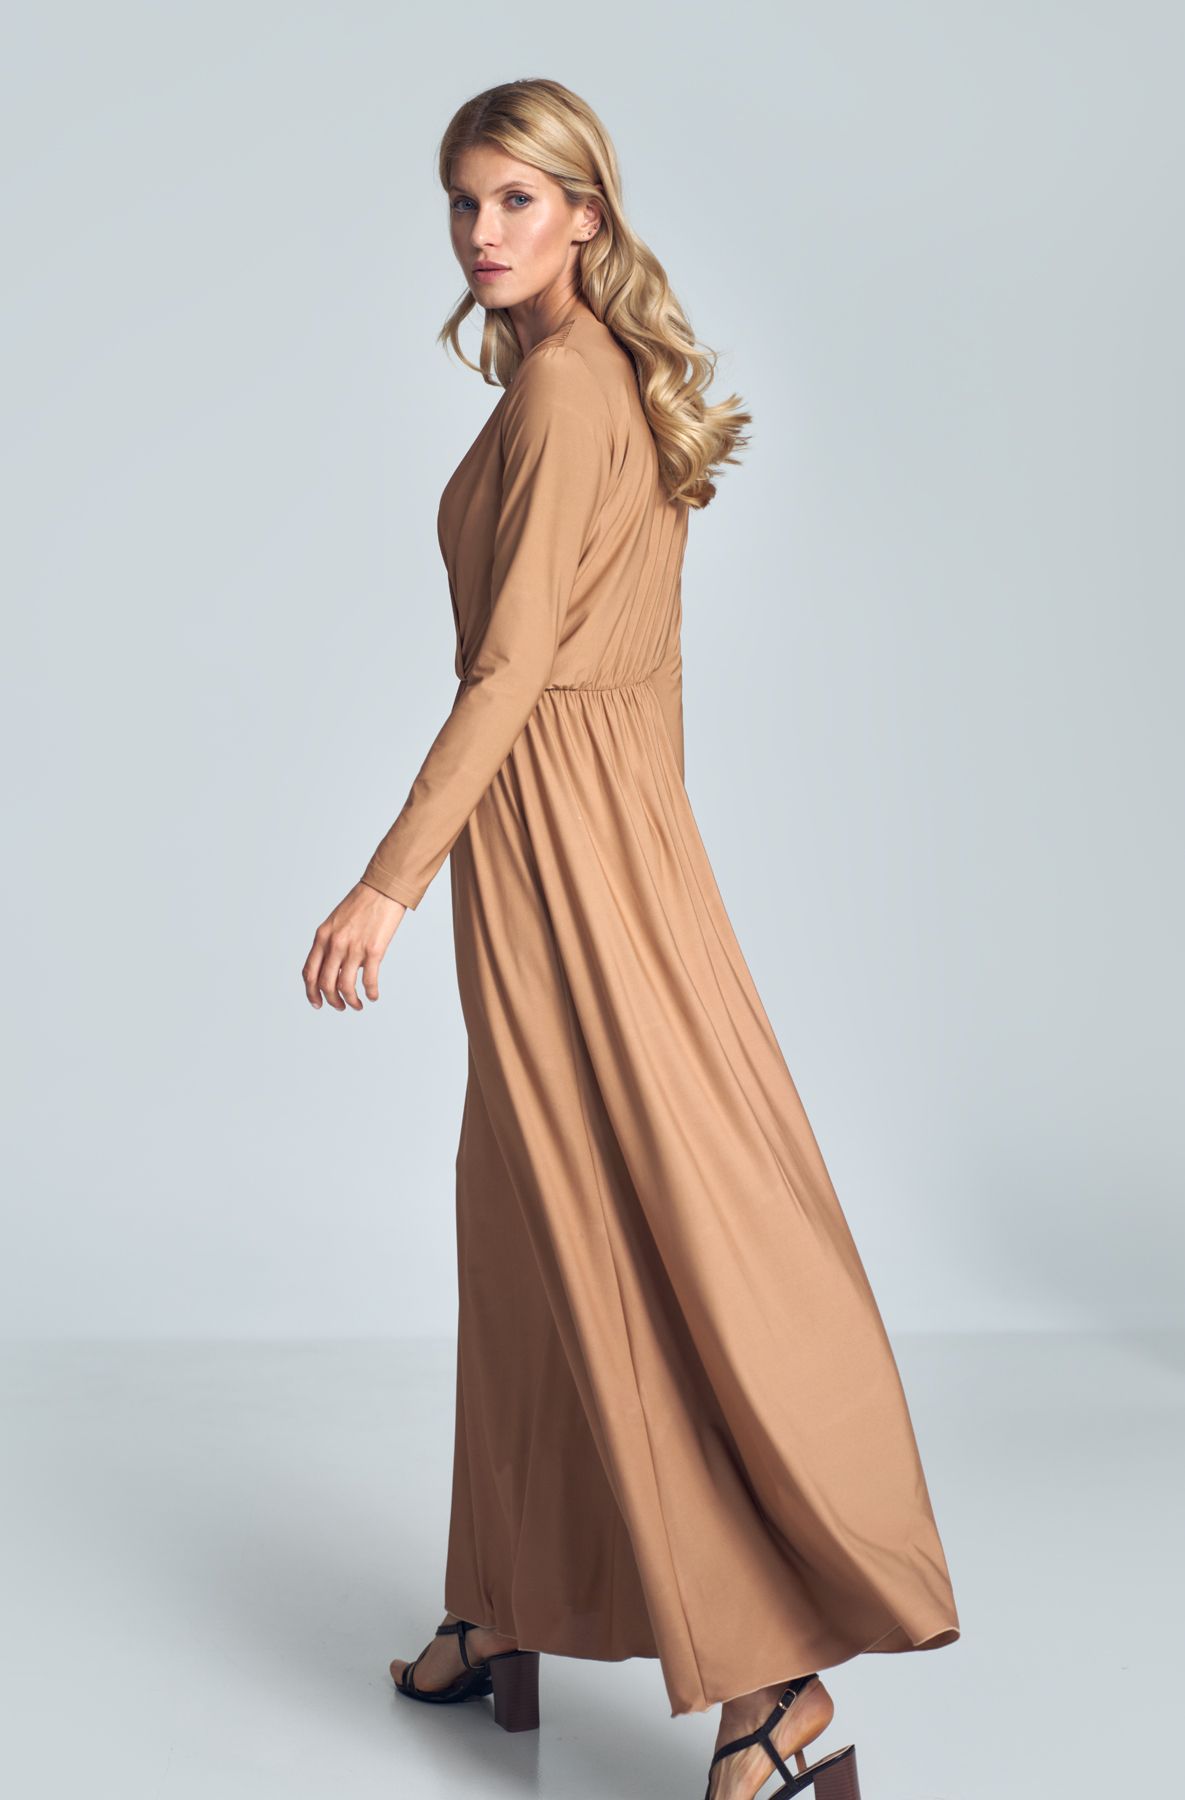 Beige maxi dress with long sleeves, wrap creased neckline, elasticated band sewn in the waist.